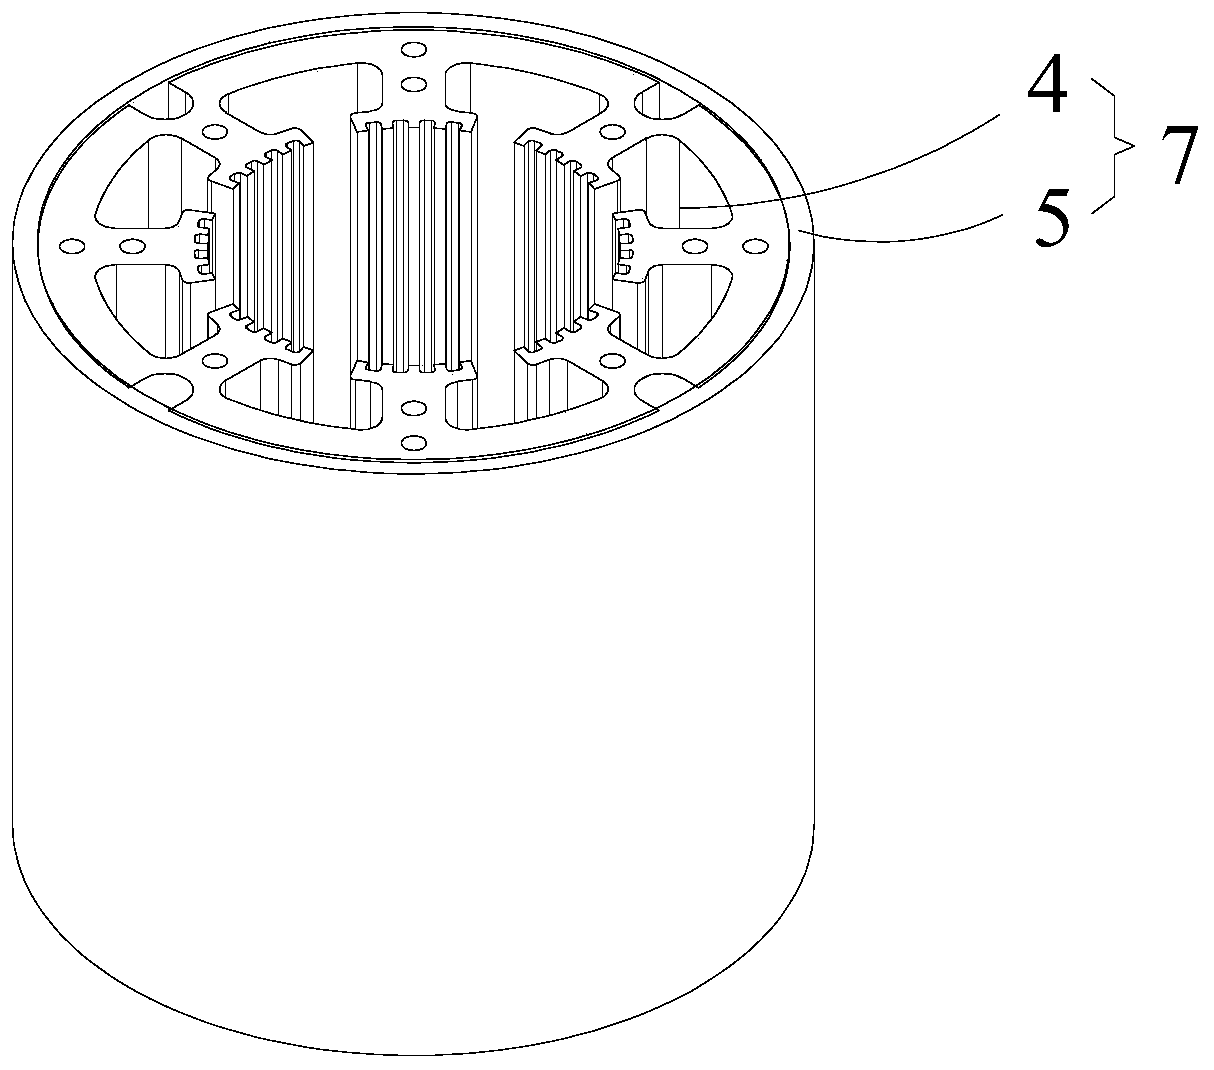 A method for assembling high and low temperature vacuum stepping motors